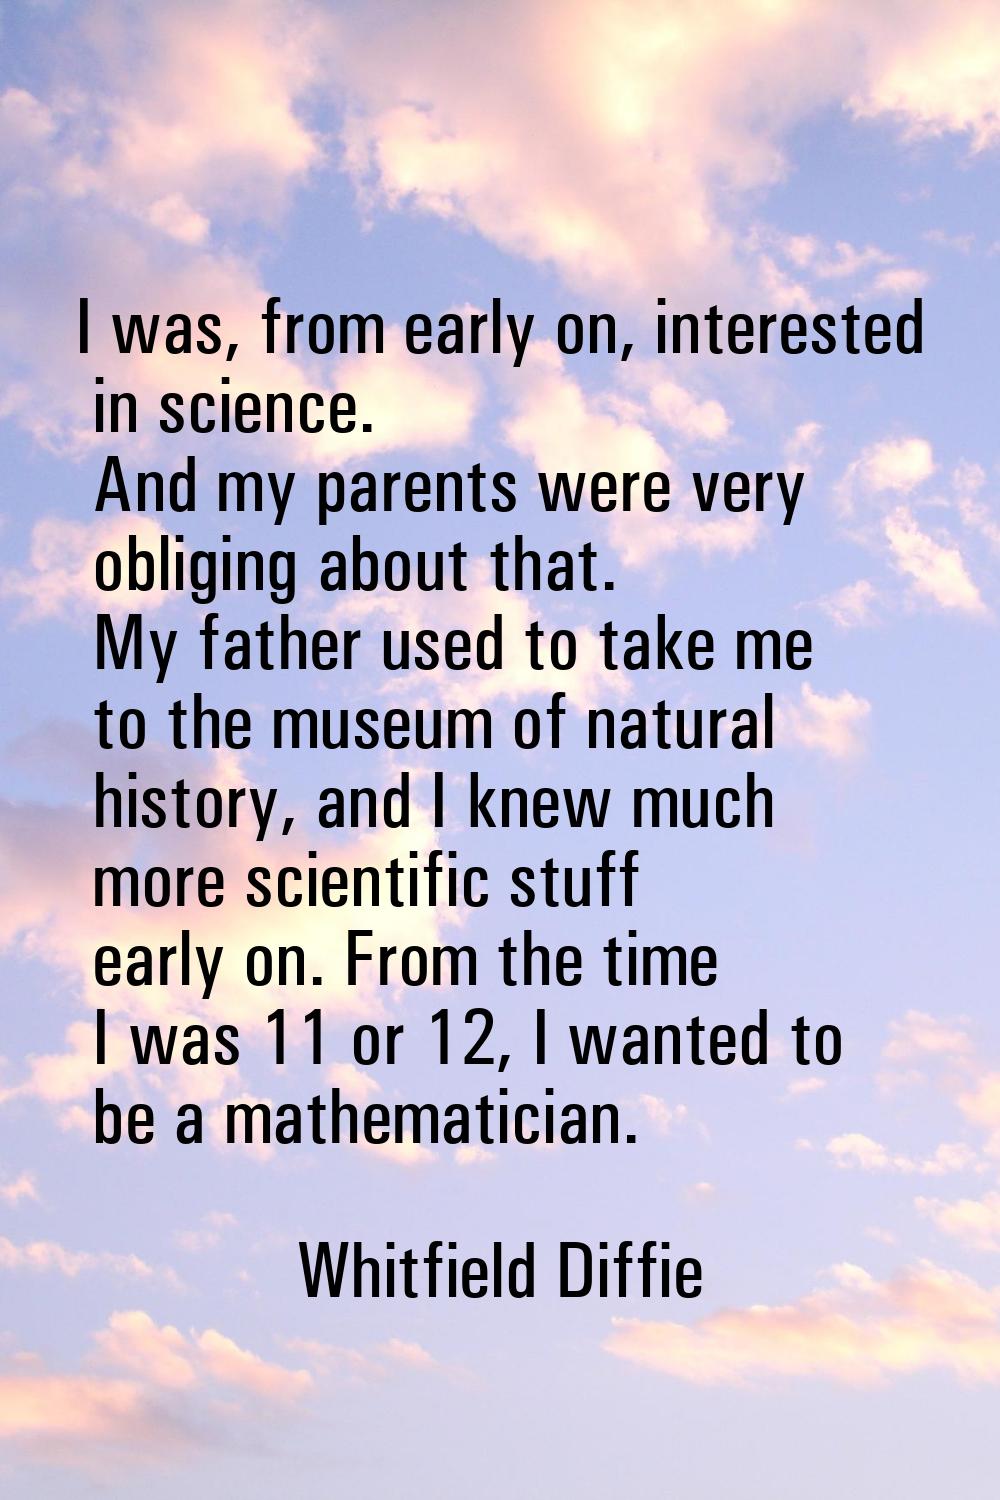 I was, from early on, interested in science. And my parents were very obliging about that. My fathe